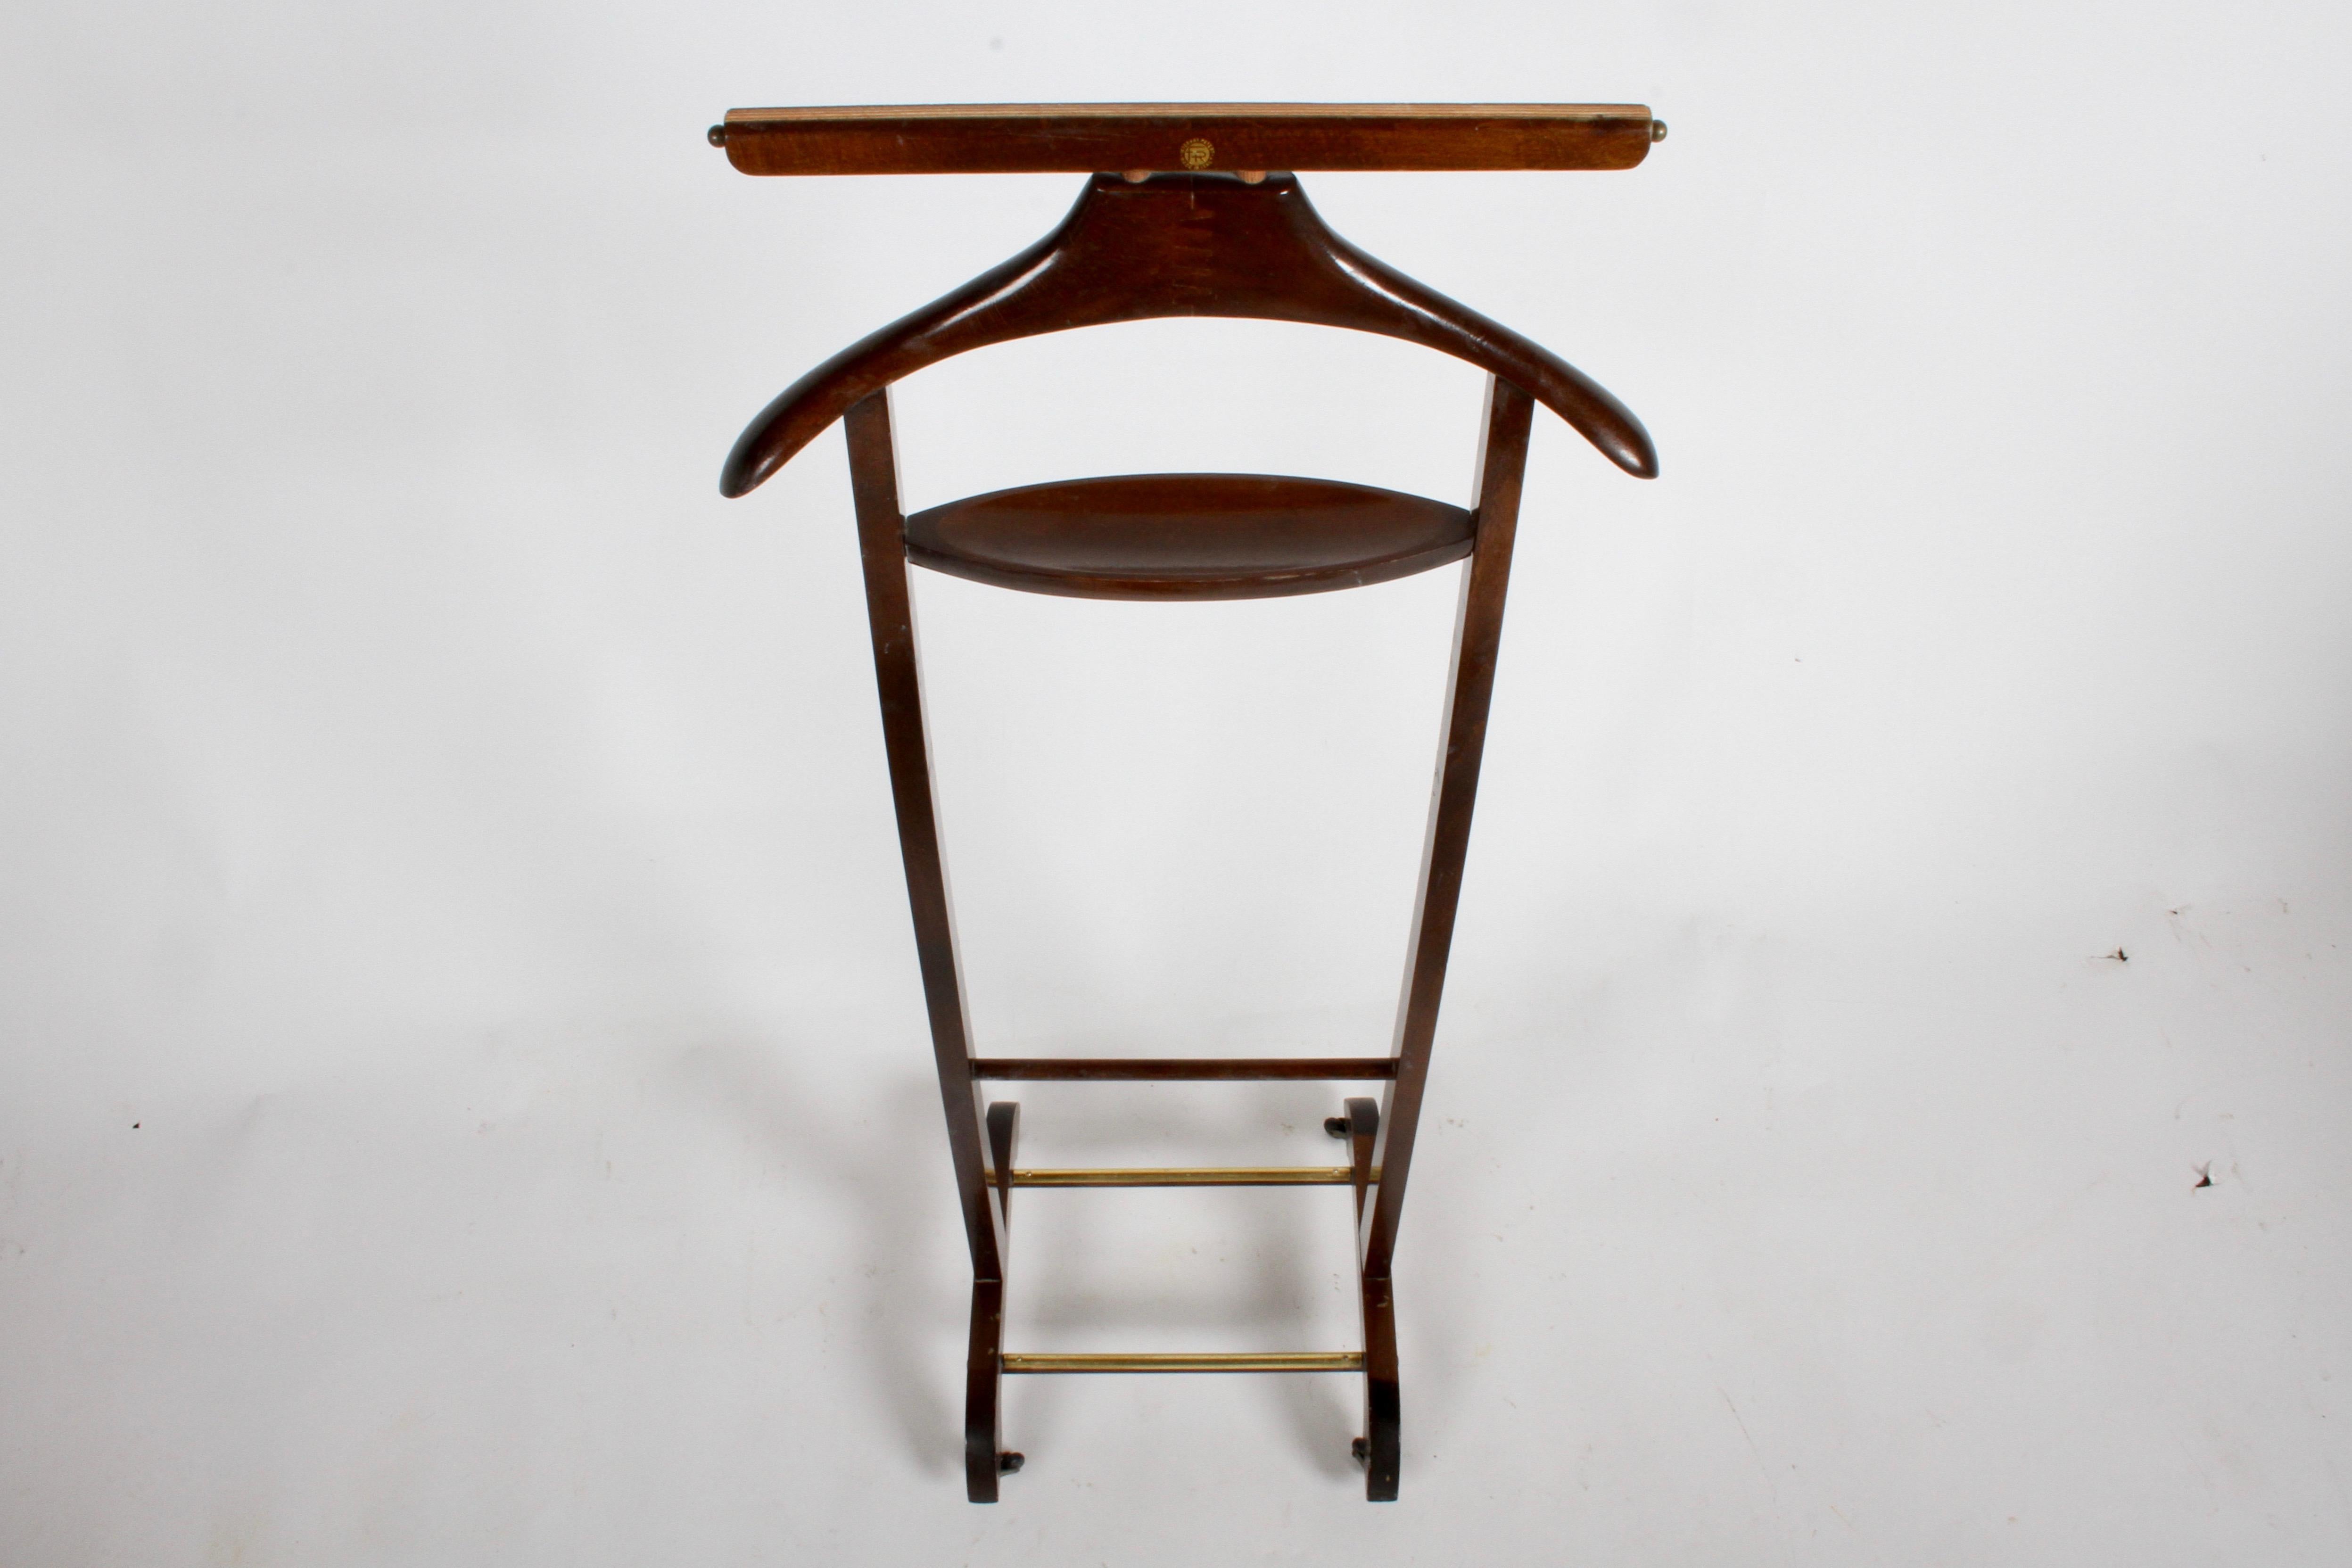 Midcentury clothes valet by Fratelli Reguitti, Italy in the style of Ico Parisi. Beechwood with brass and rubber castors and brass tie holders, original finish.